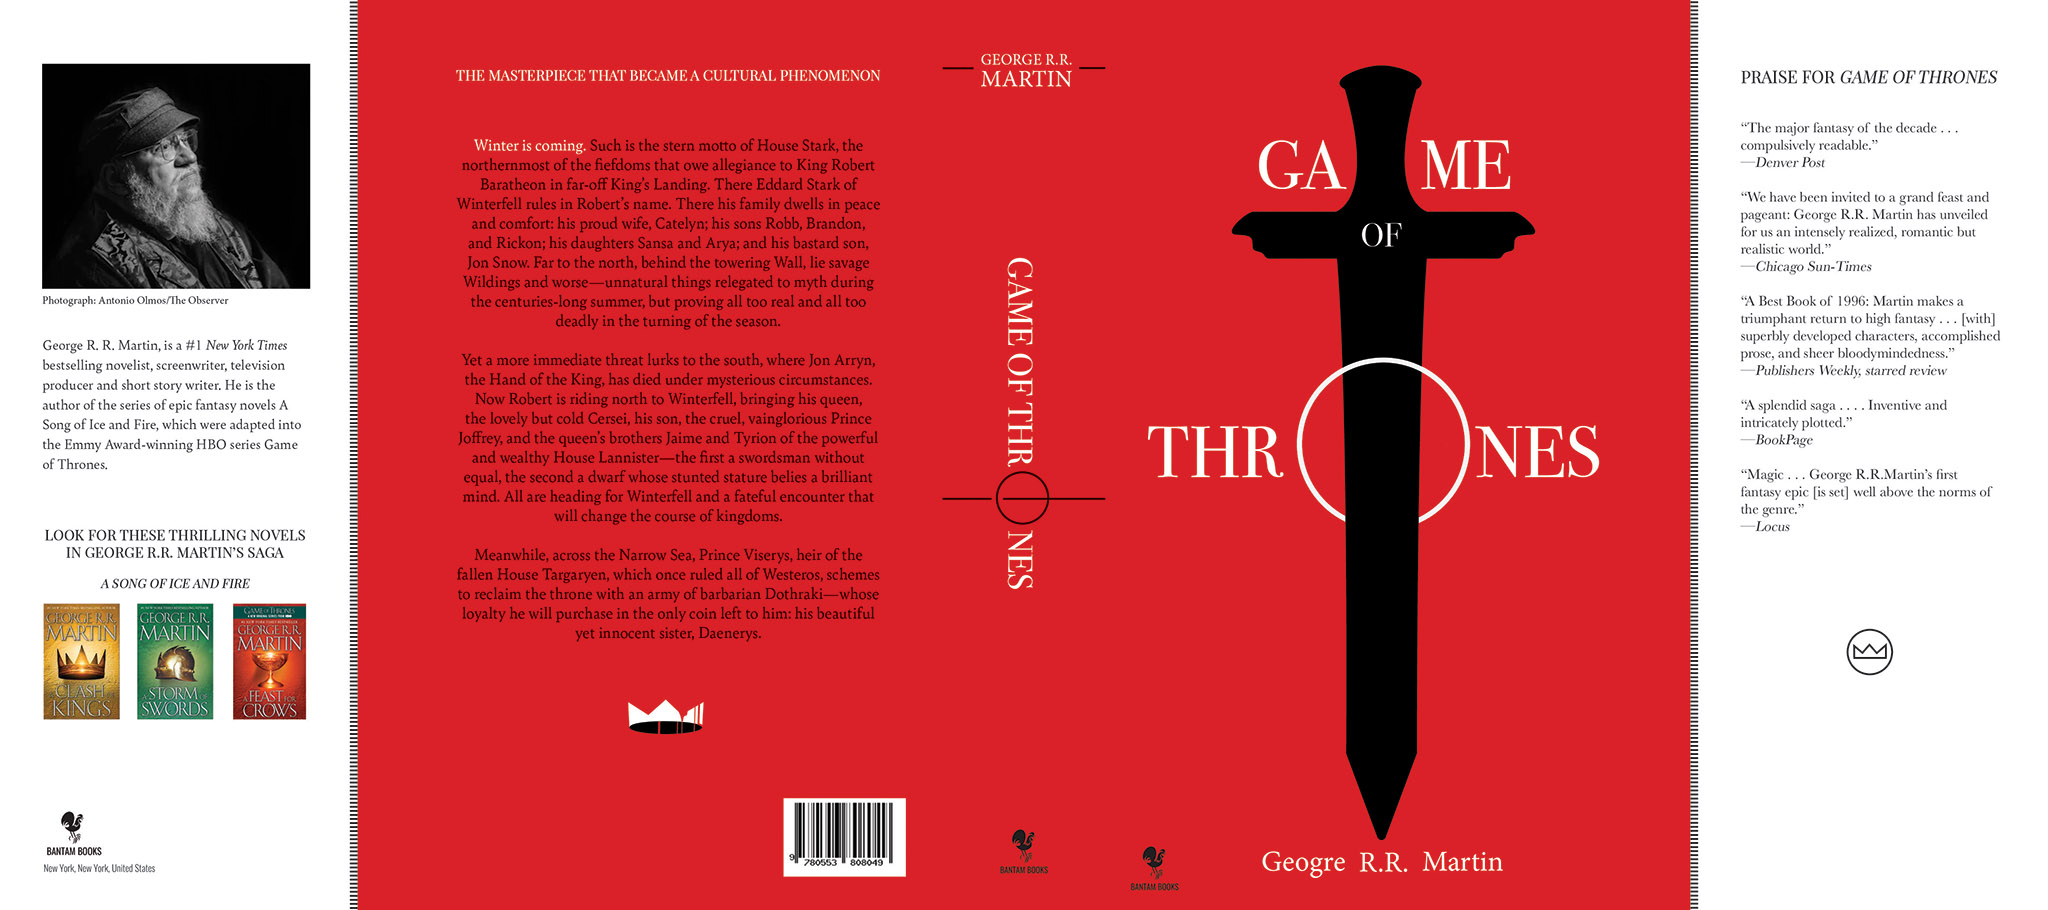 This image is a visual of the dust jacket created for the first book in the Song of Ice and Fire series, better known as Game of Thrones. The dust jacket itself is mostly a deep red colour with black and white detailing and a sword on the front. The look is minimalist and relies on subtle references to the book.